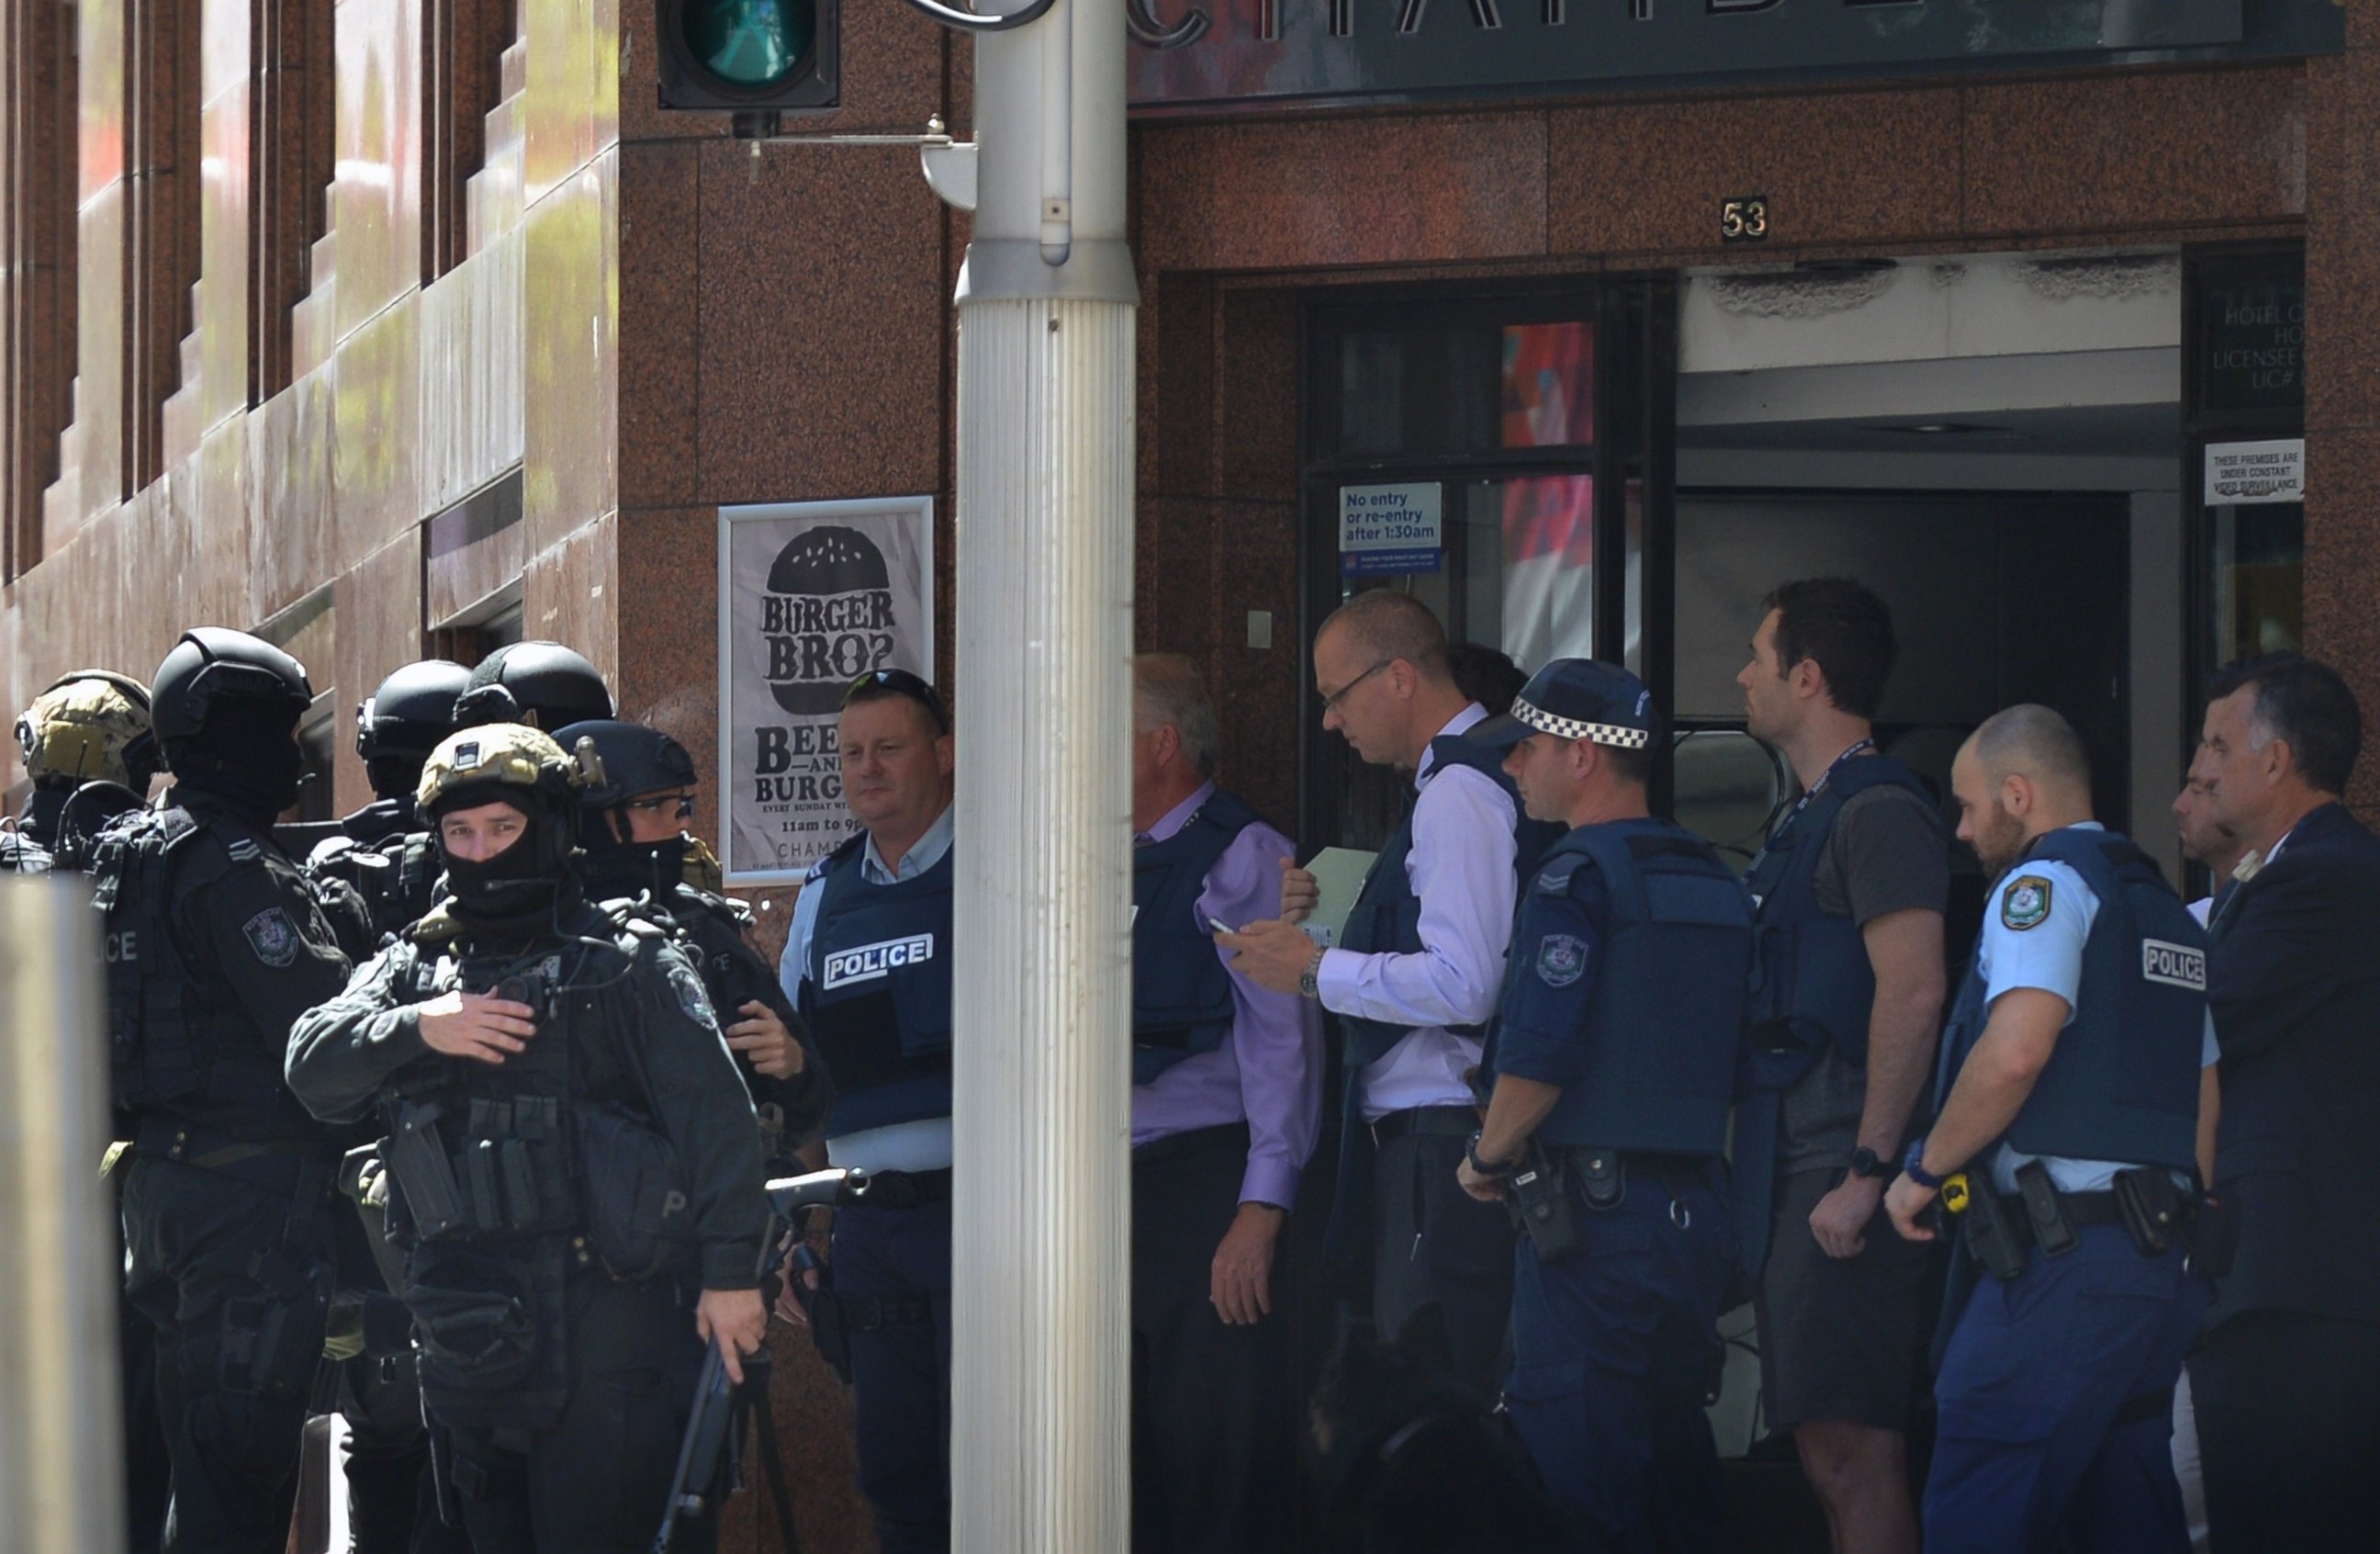 PHOTO: Armed police are seen outside a cafe in the central business district of Sydney on Dec. 15, 2014.  